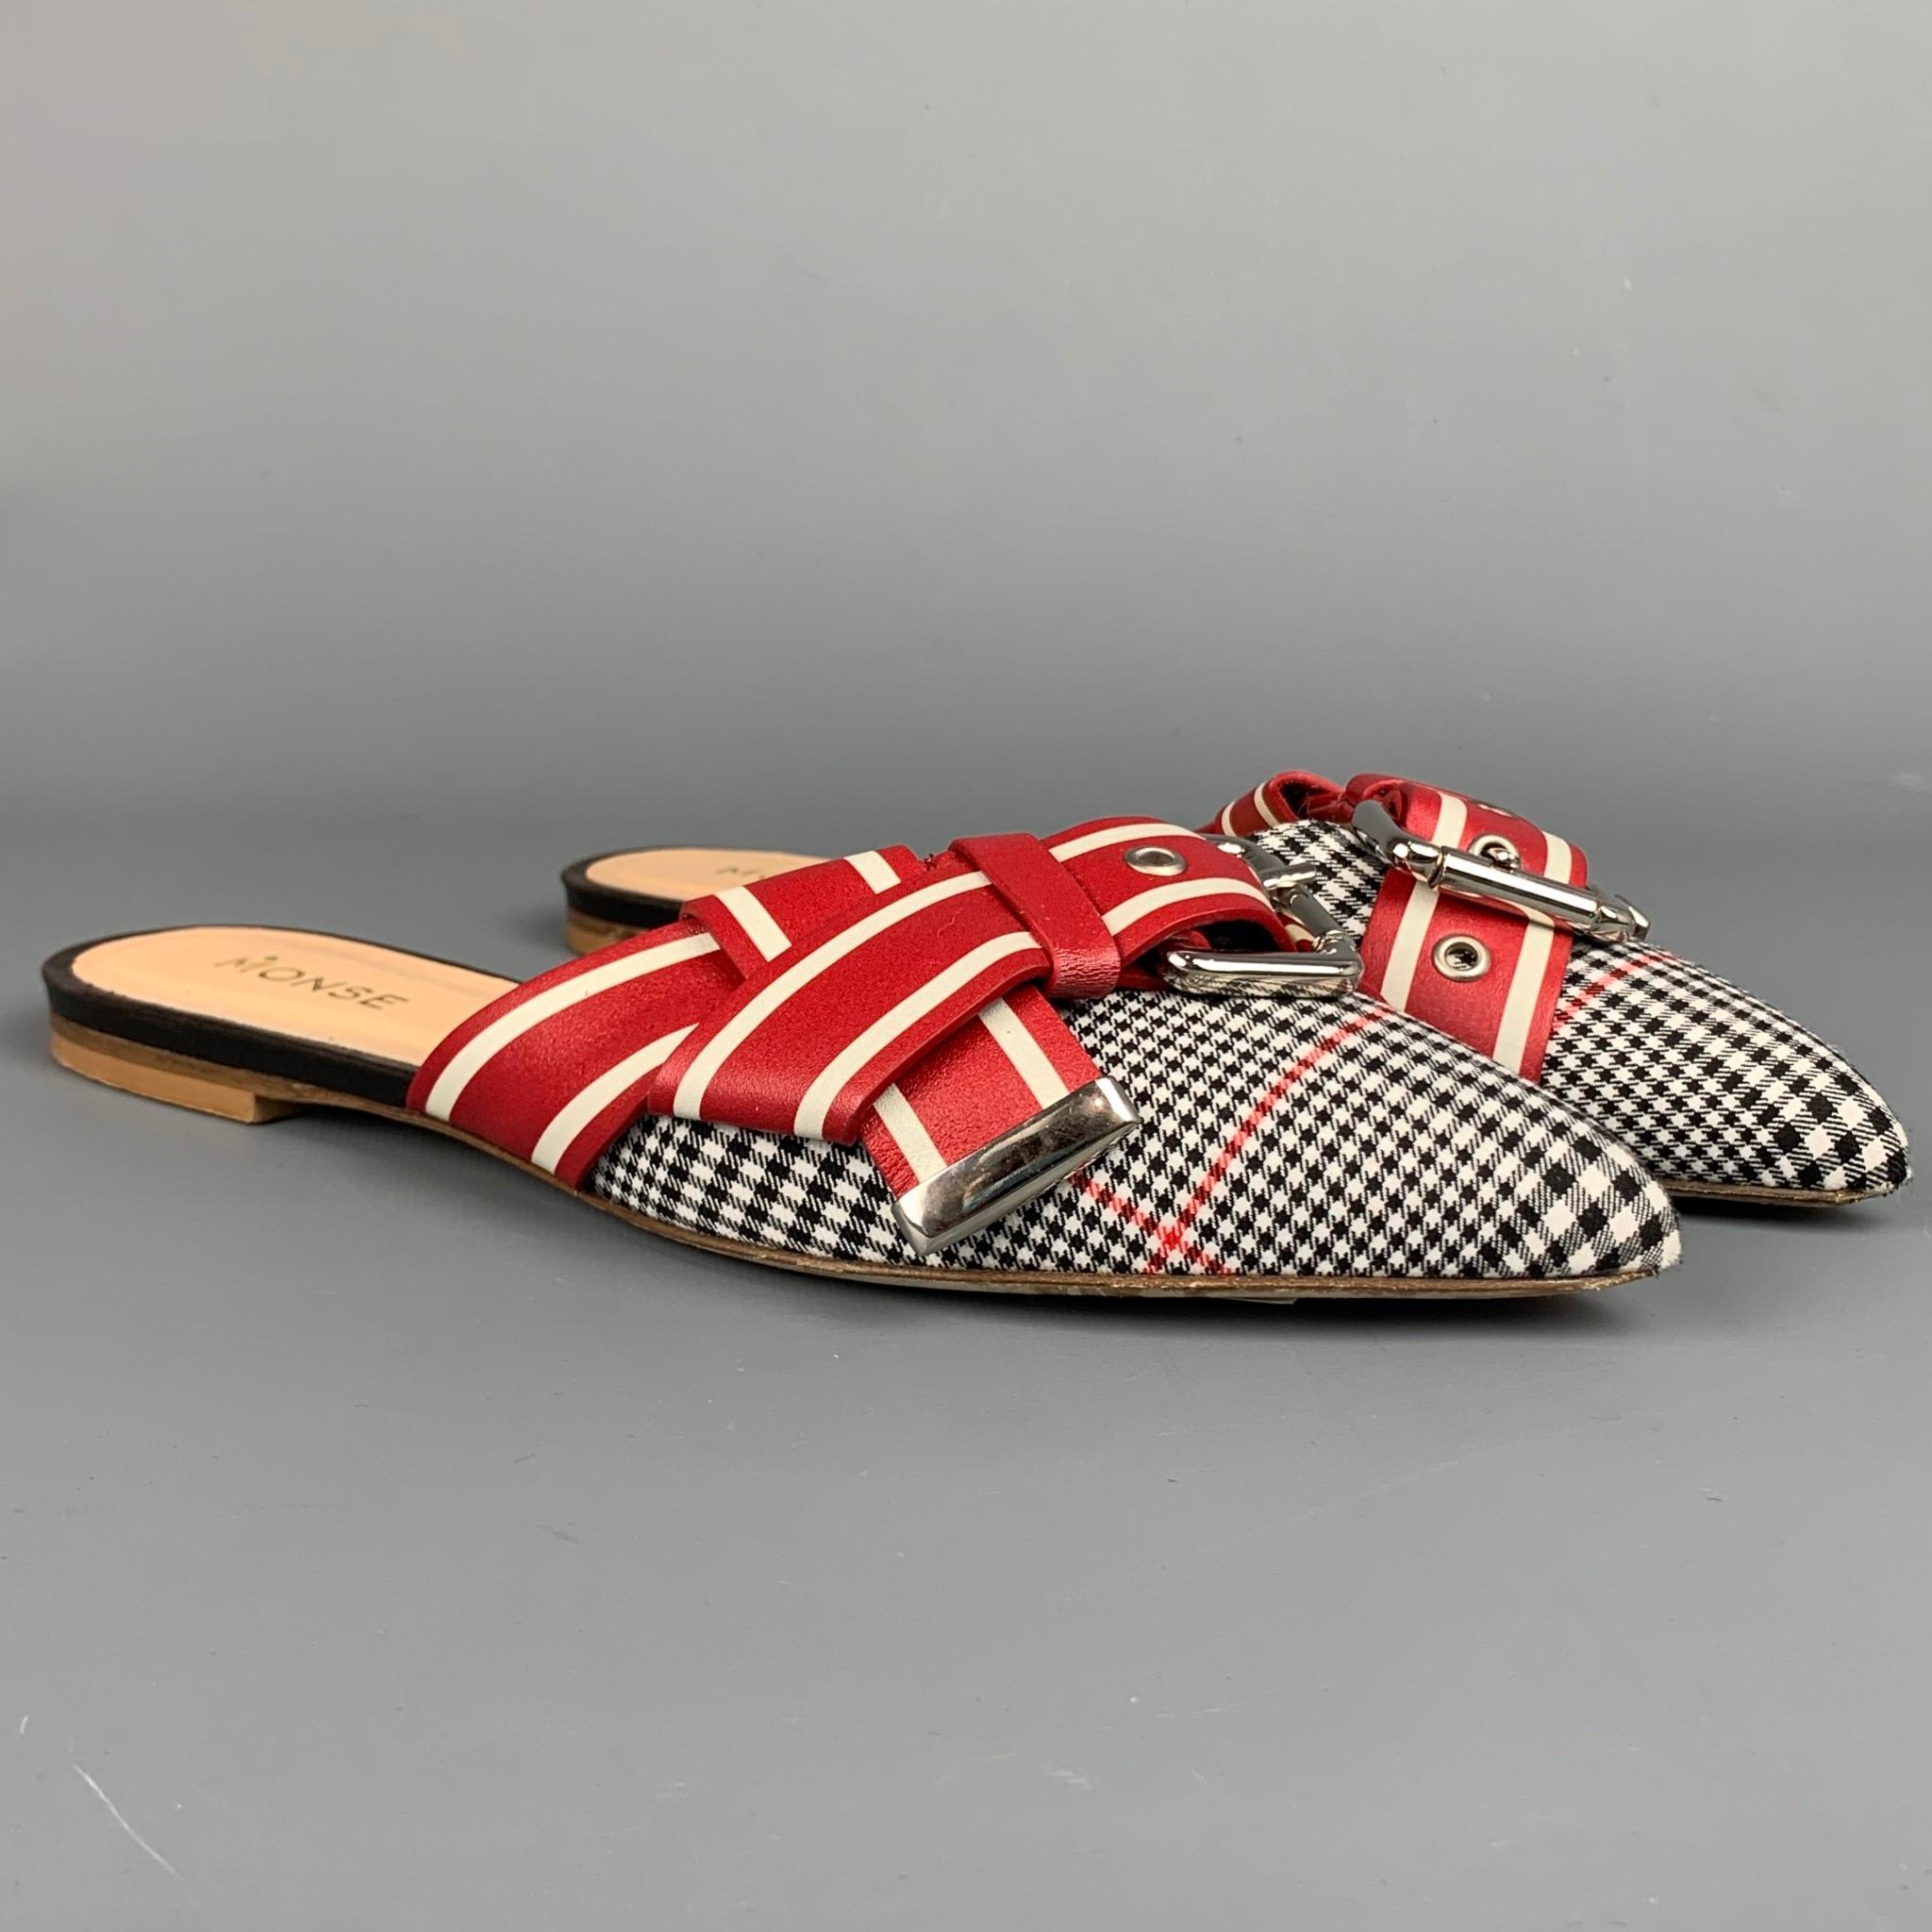 MONSE flats comes in a red & black print material featuring a mule style, pointed toe, buckle detail, and a wooden sole.

Very Good Pre-Owned Condition.
Marked: 38
Original Retail Price: $790.00

Outsole: 

10 in. x 3 in. 